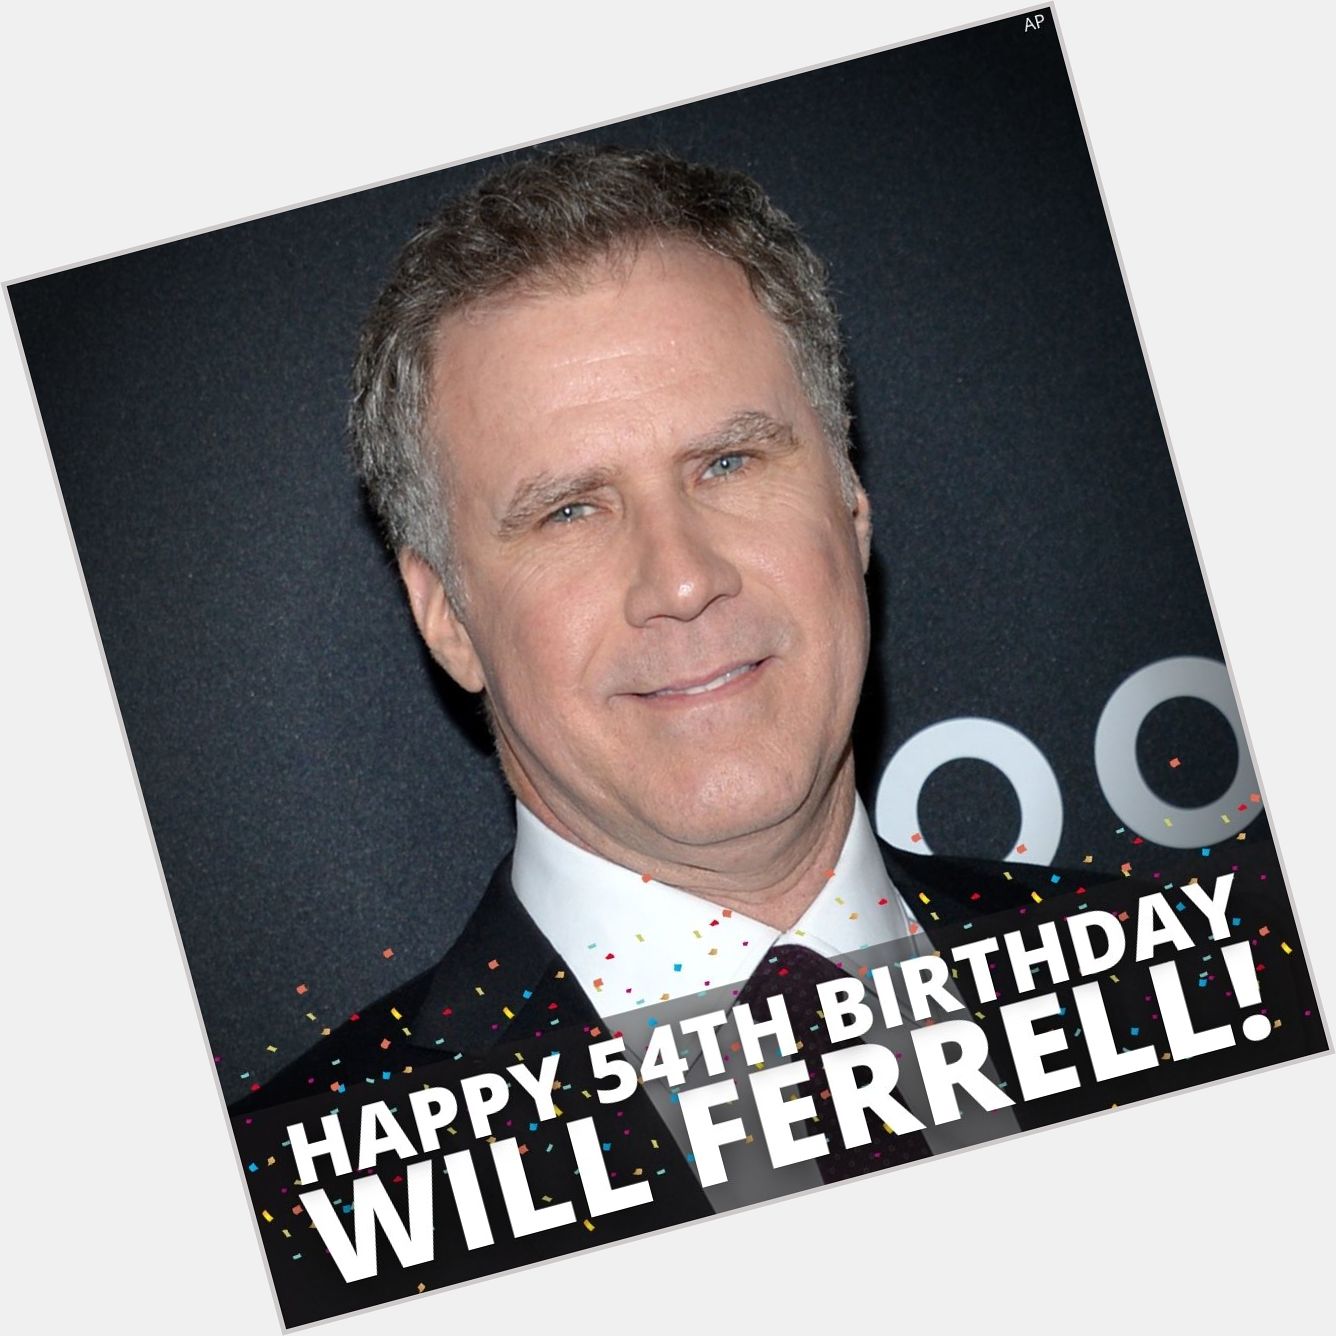 You may remember him from Talladega Nights or Step Brothers, join us in wishing Will Ferrell a happy 54th birthday!! 